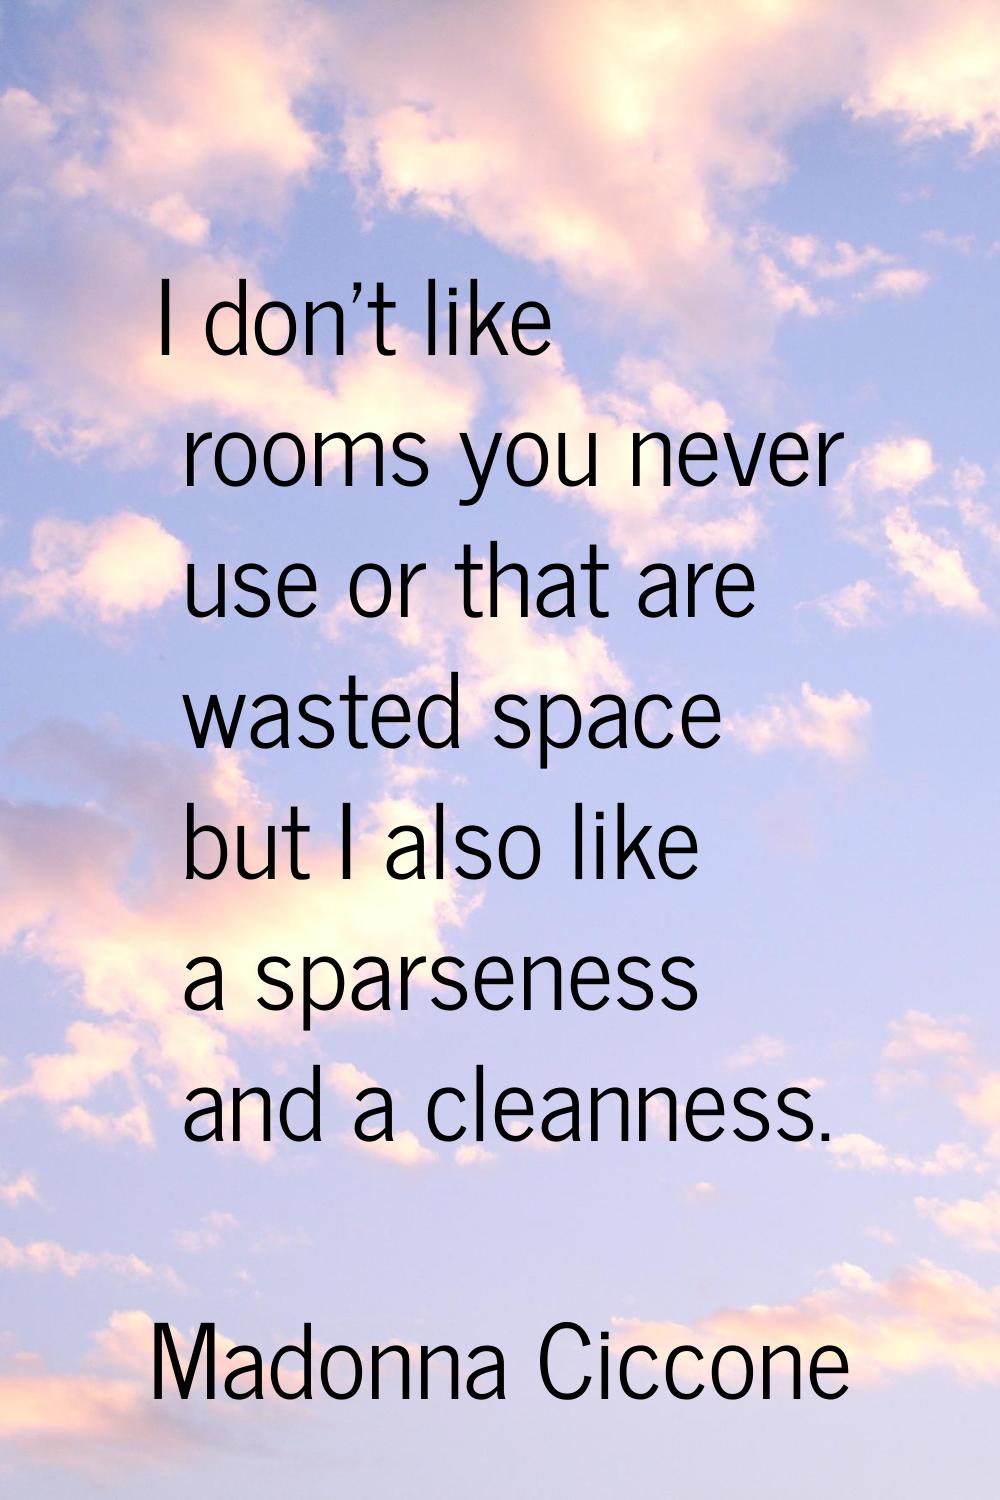 I don't like rooms you never use or that are wasted space but I also like a sparseness and a cleann